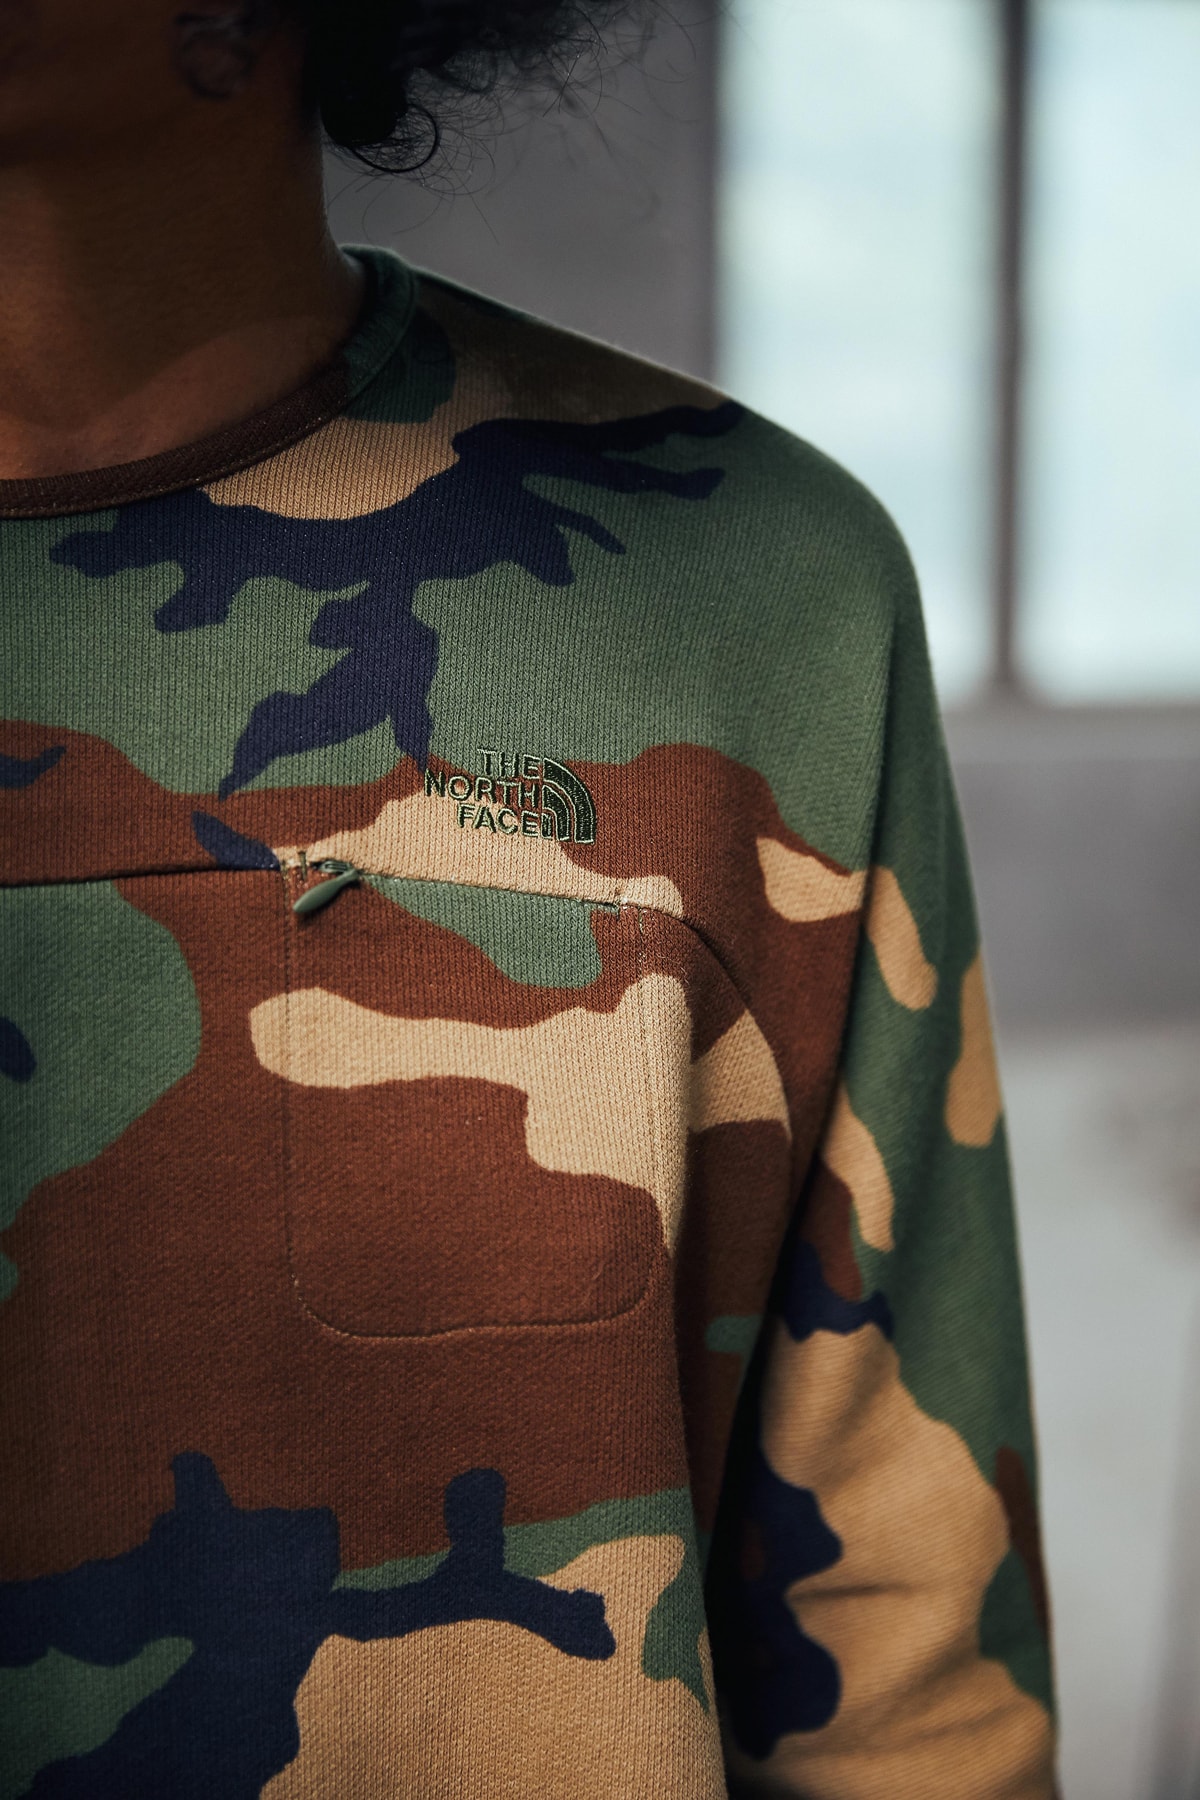 The North Face Urban Exploration Black Series Spring/Summer 2018 Collection Lookbook Shirt Camo